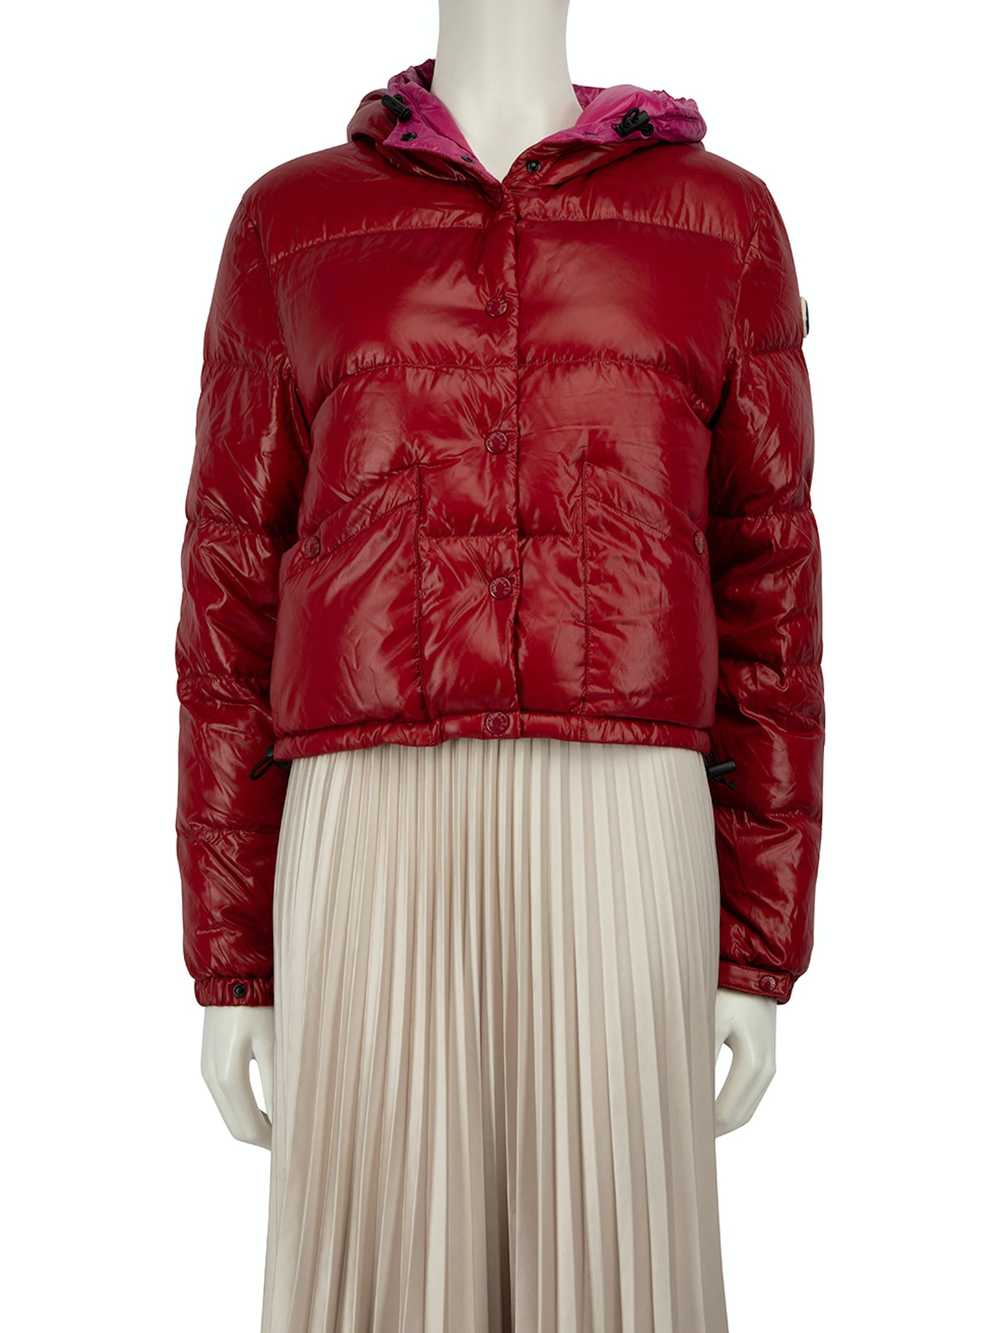 Moncler Red Hooded Puffer Goose Down Coat - image 1